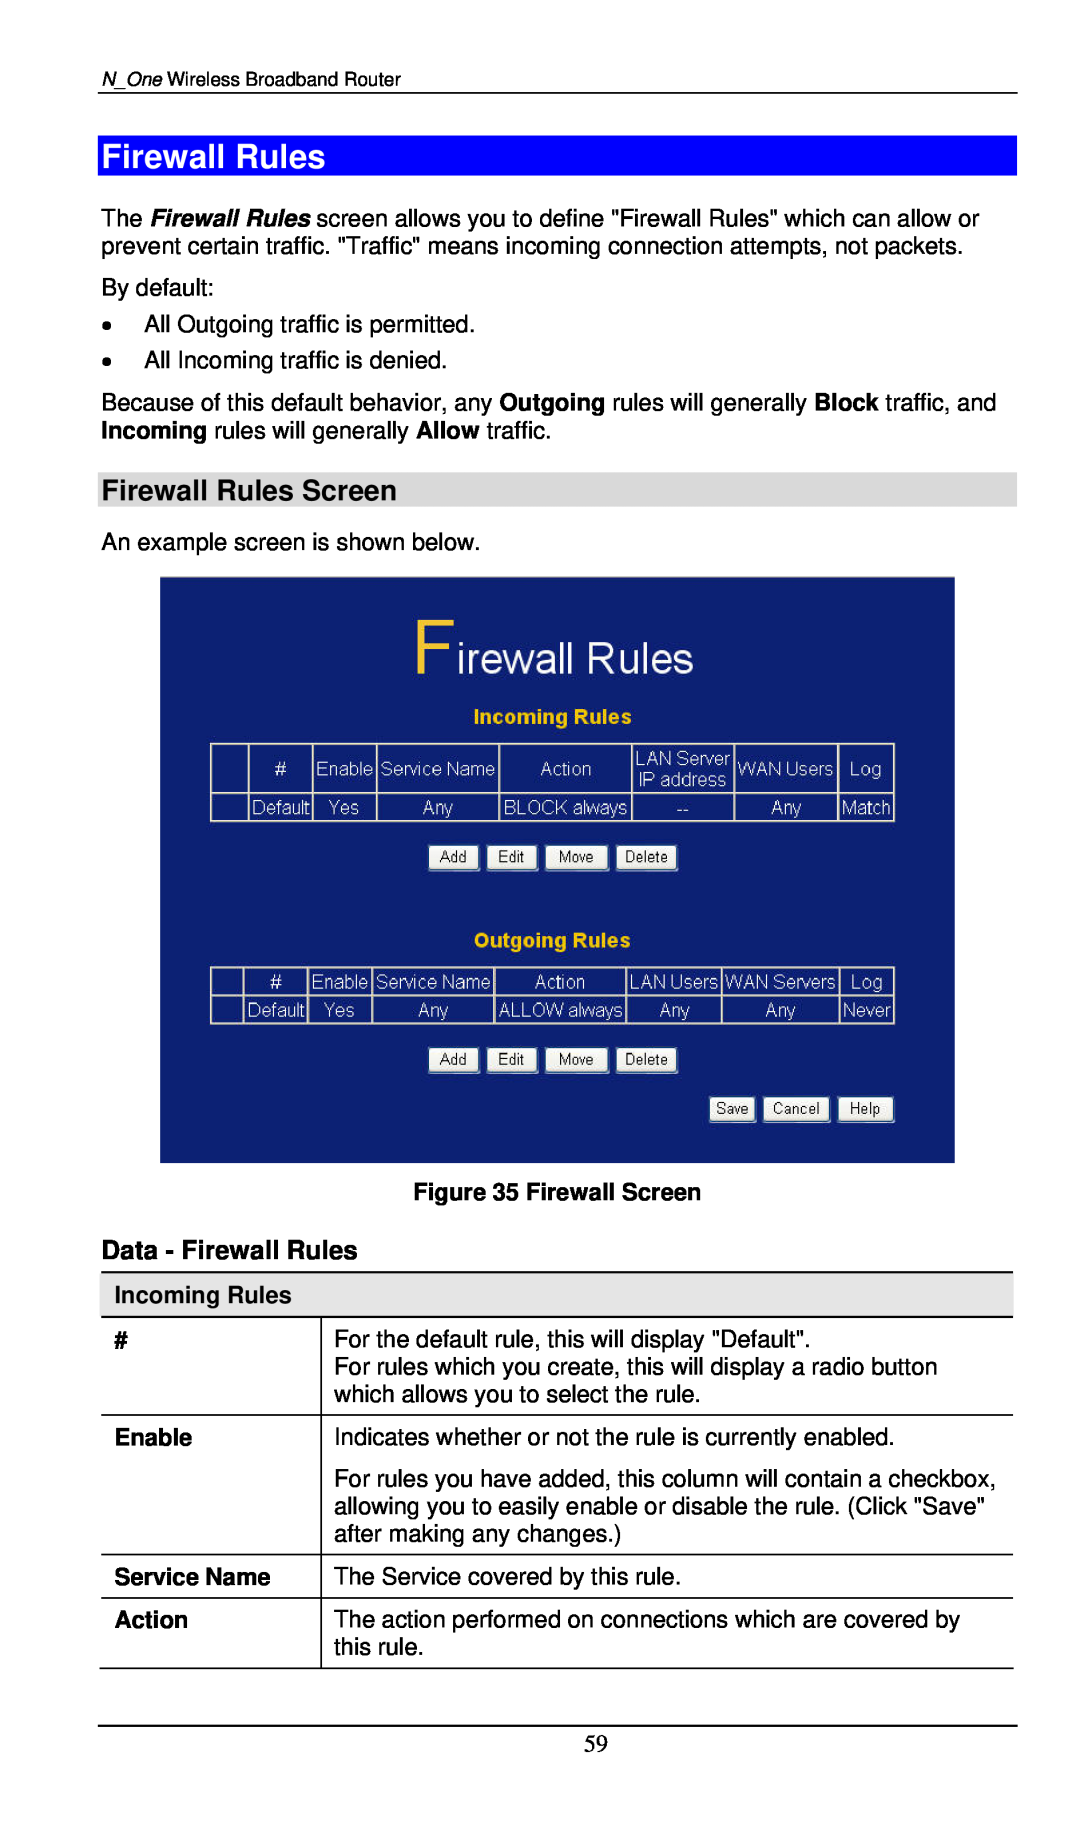 LevelOne WBR-6000 user manual Firewall Rules Screen, Firewall Screen, Incoming Rules, Enable, Service Name, Action 